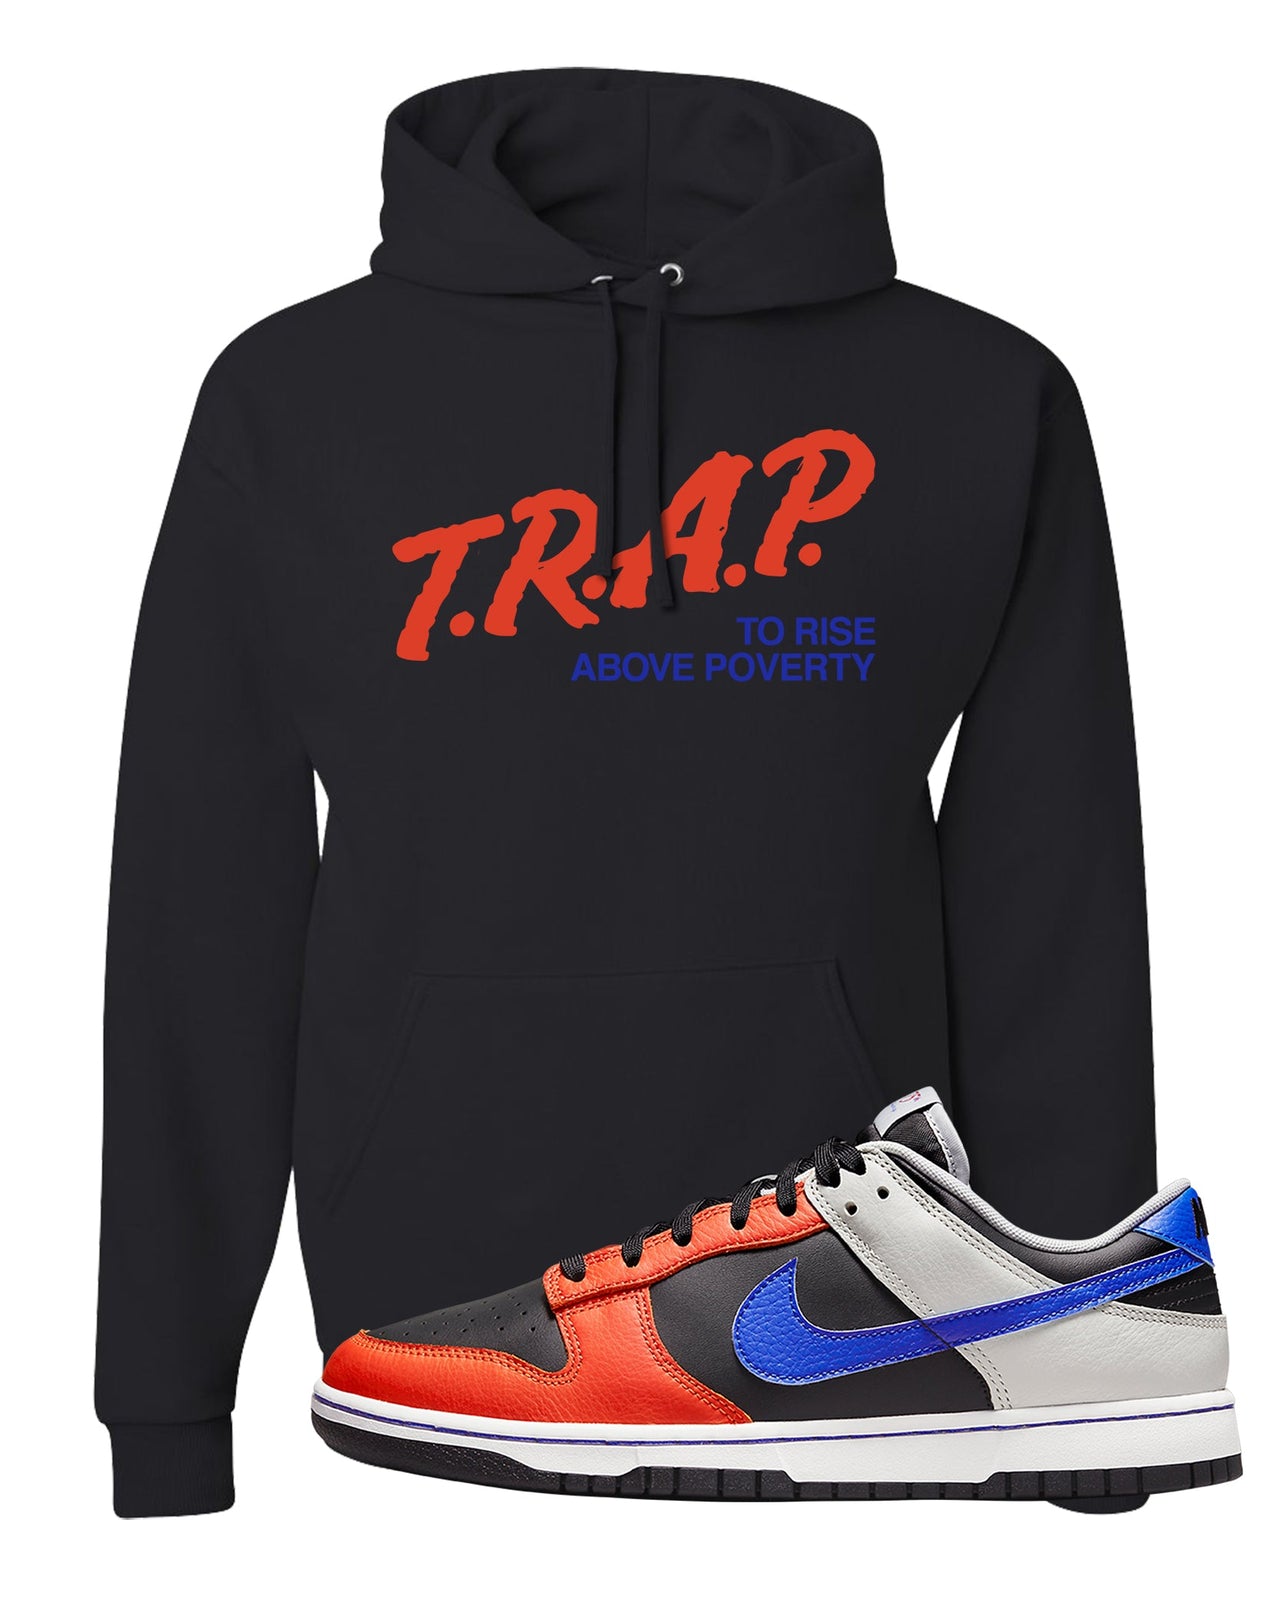 75th Anniversary Low Dunks Hoodie | Trap To Rise Above Poverty, Black